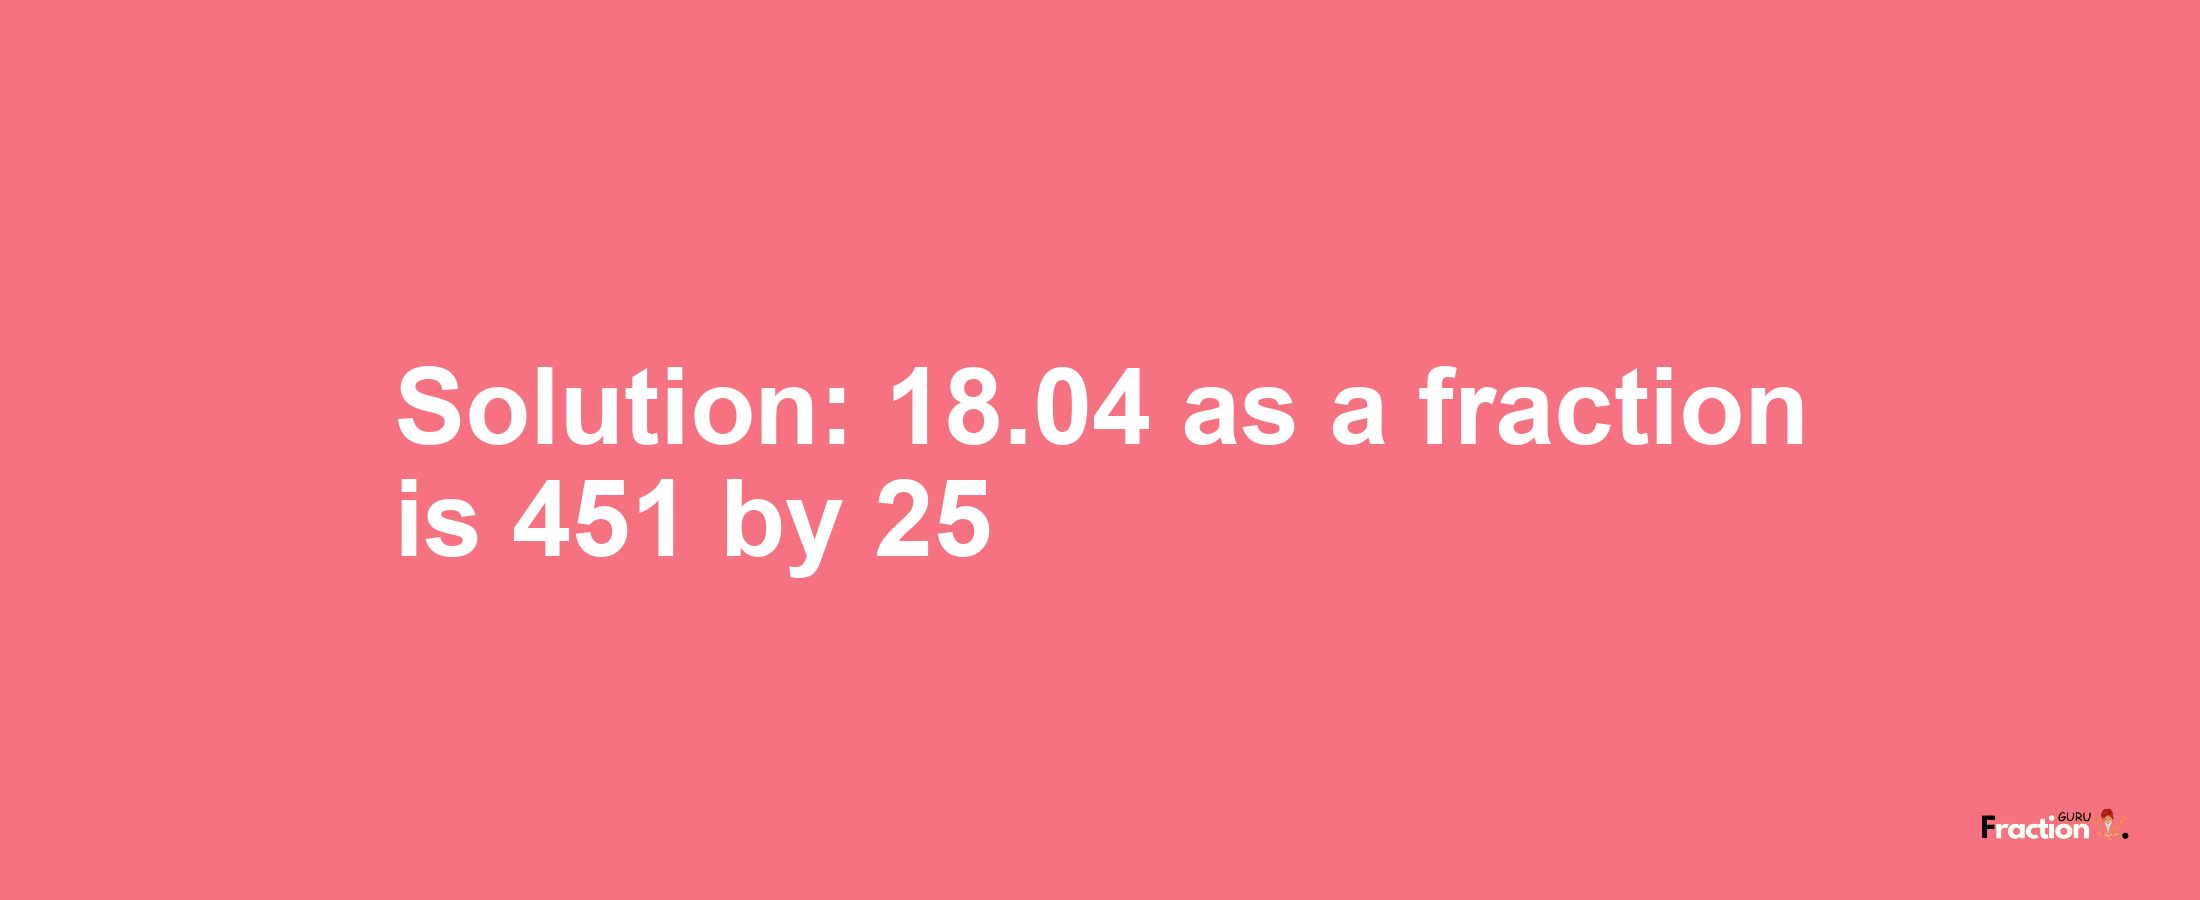 Solution:18.04 as a fraction is 451/25